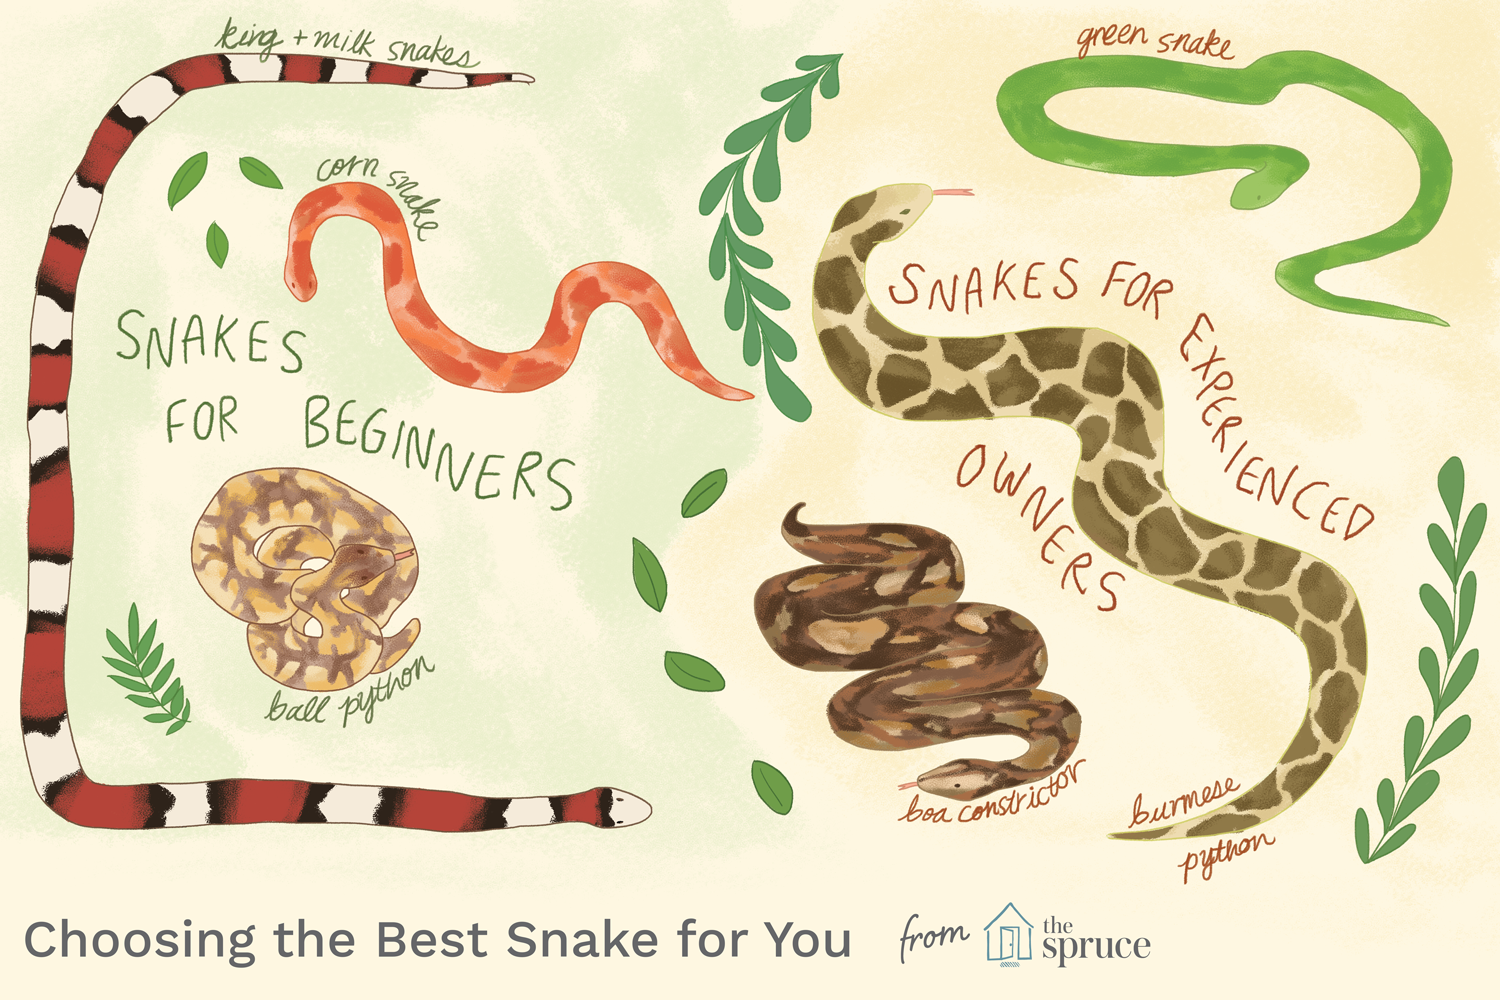 Illustration depicting good snakes for beginners and for experienced owners